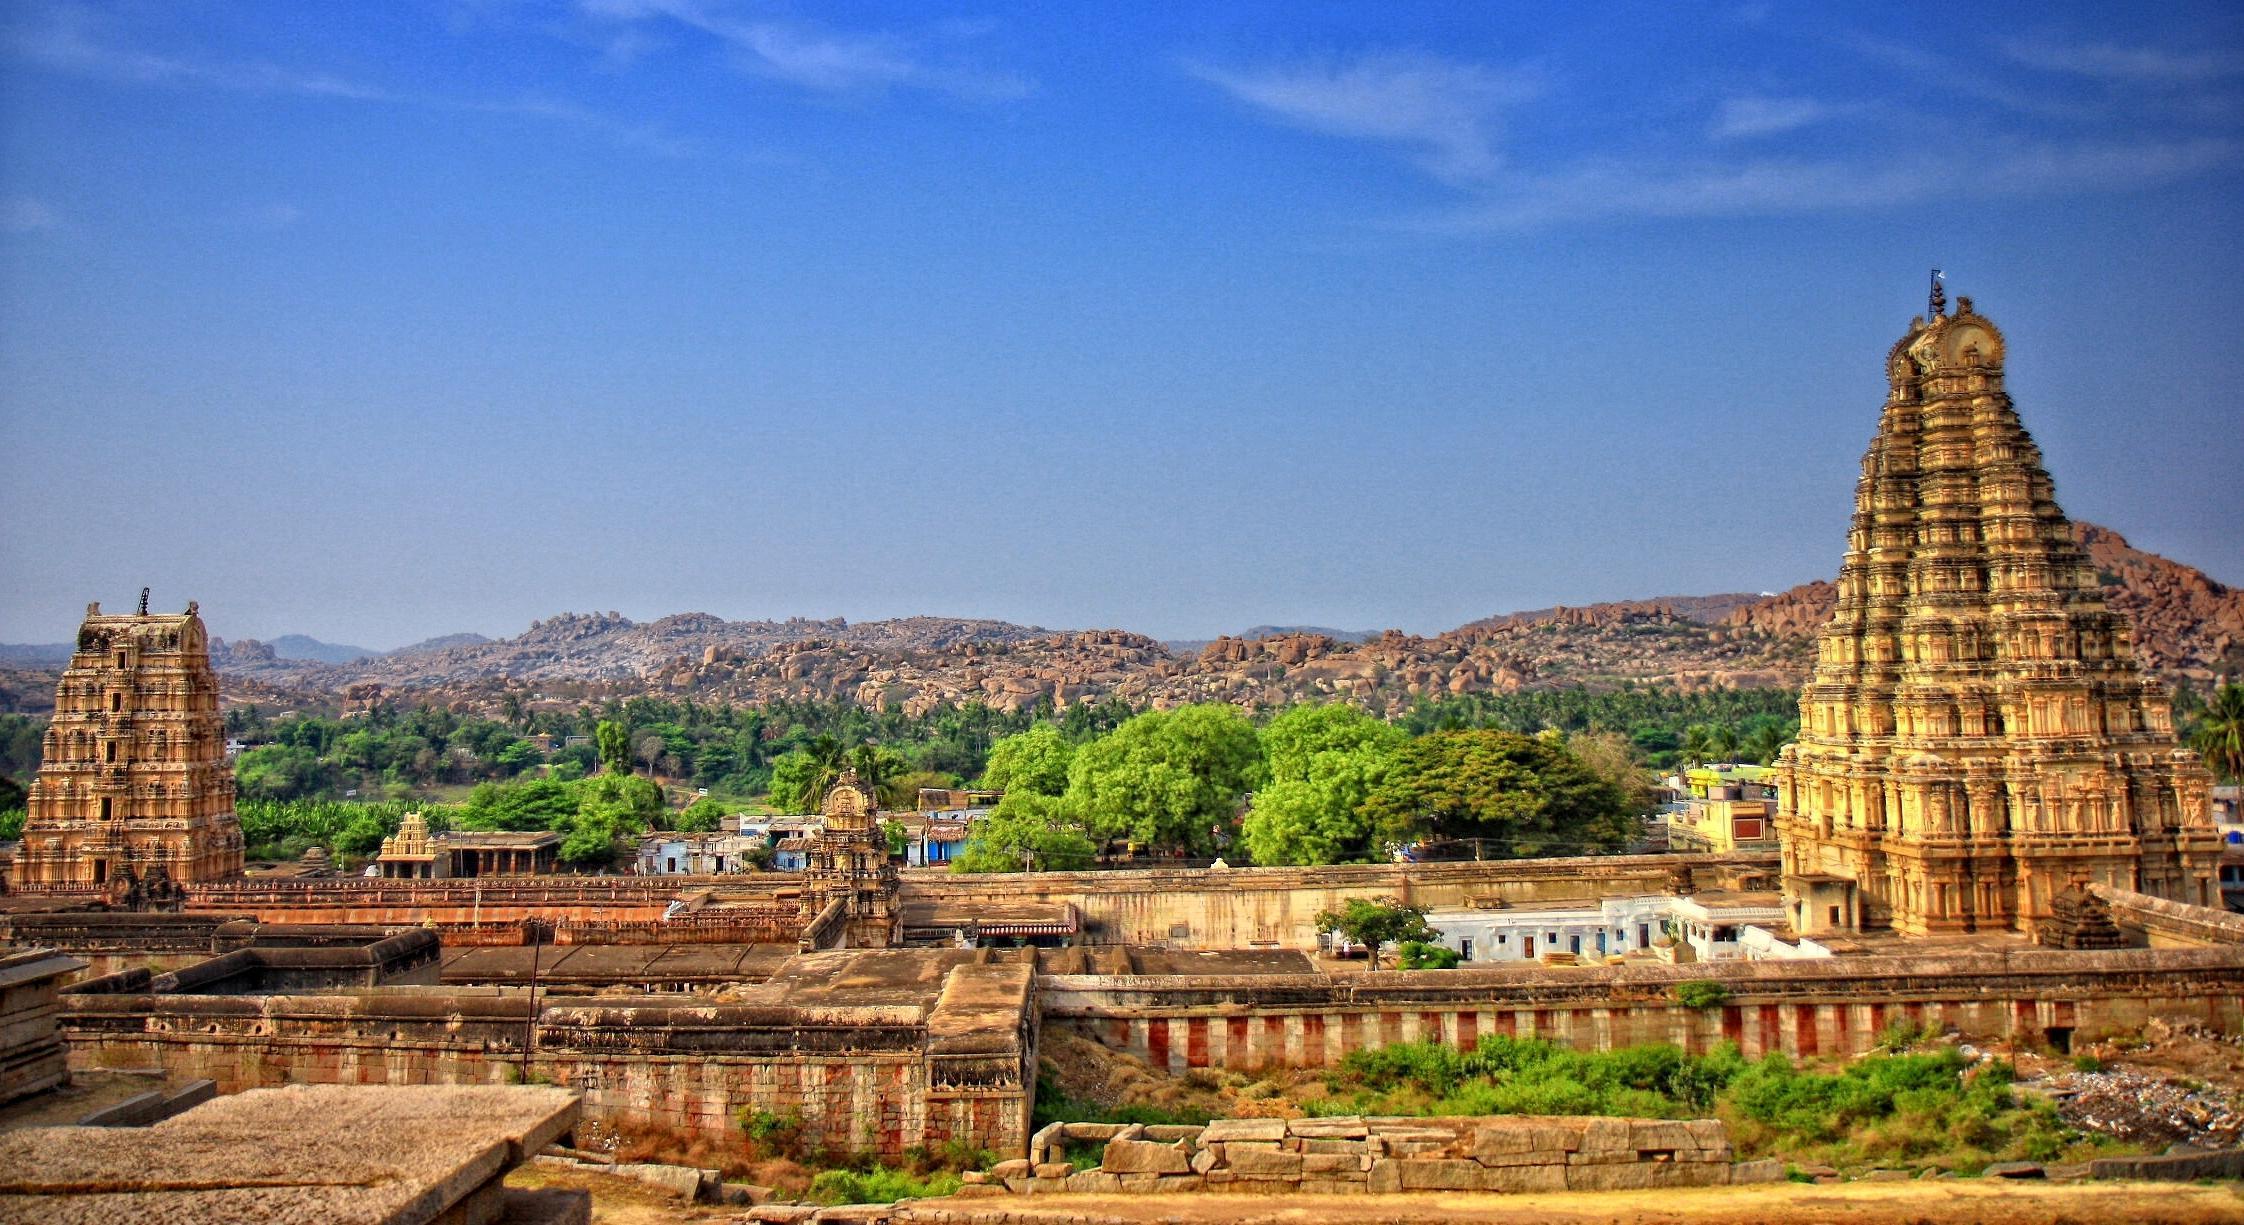 Hampi Group of Monuments – World Heritage Sites in India